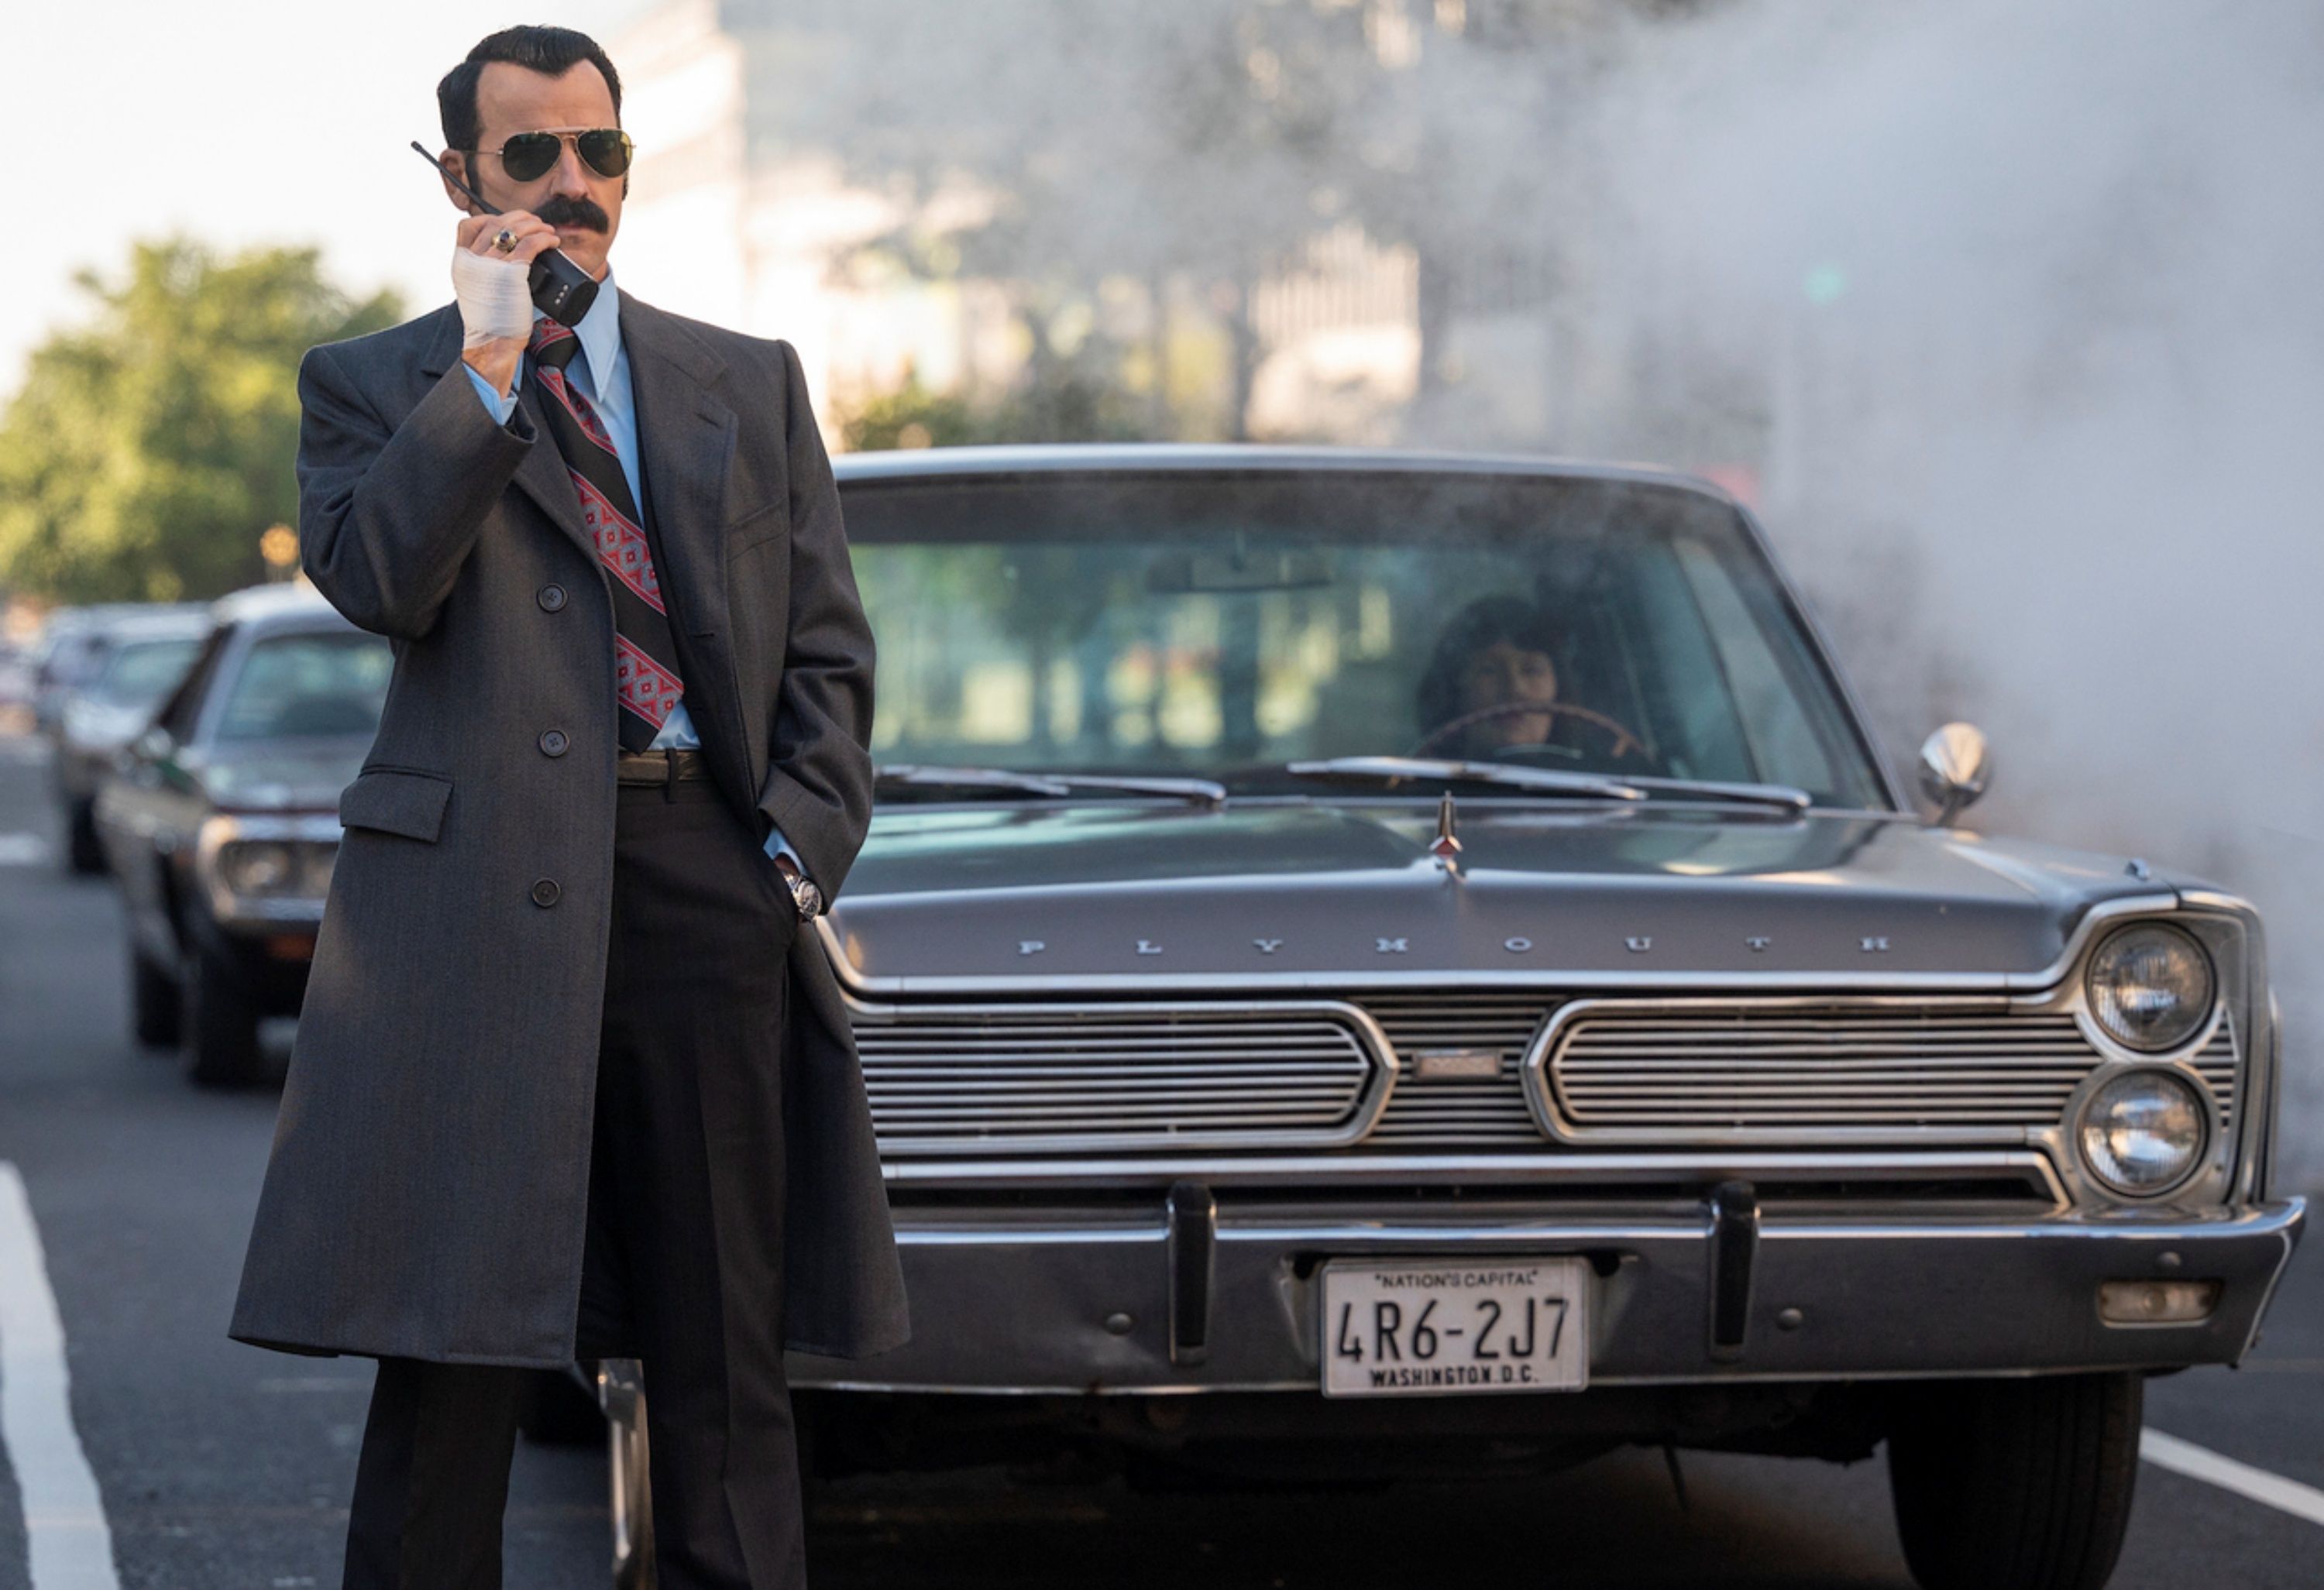 Justin Theroux as G. Gordon Liddy in White House Plumbers